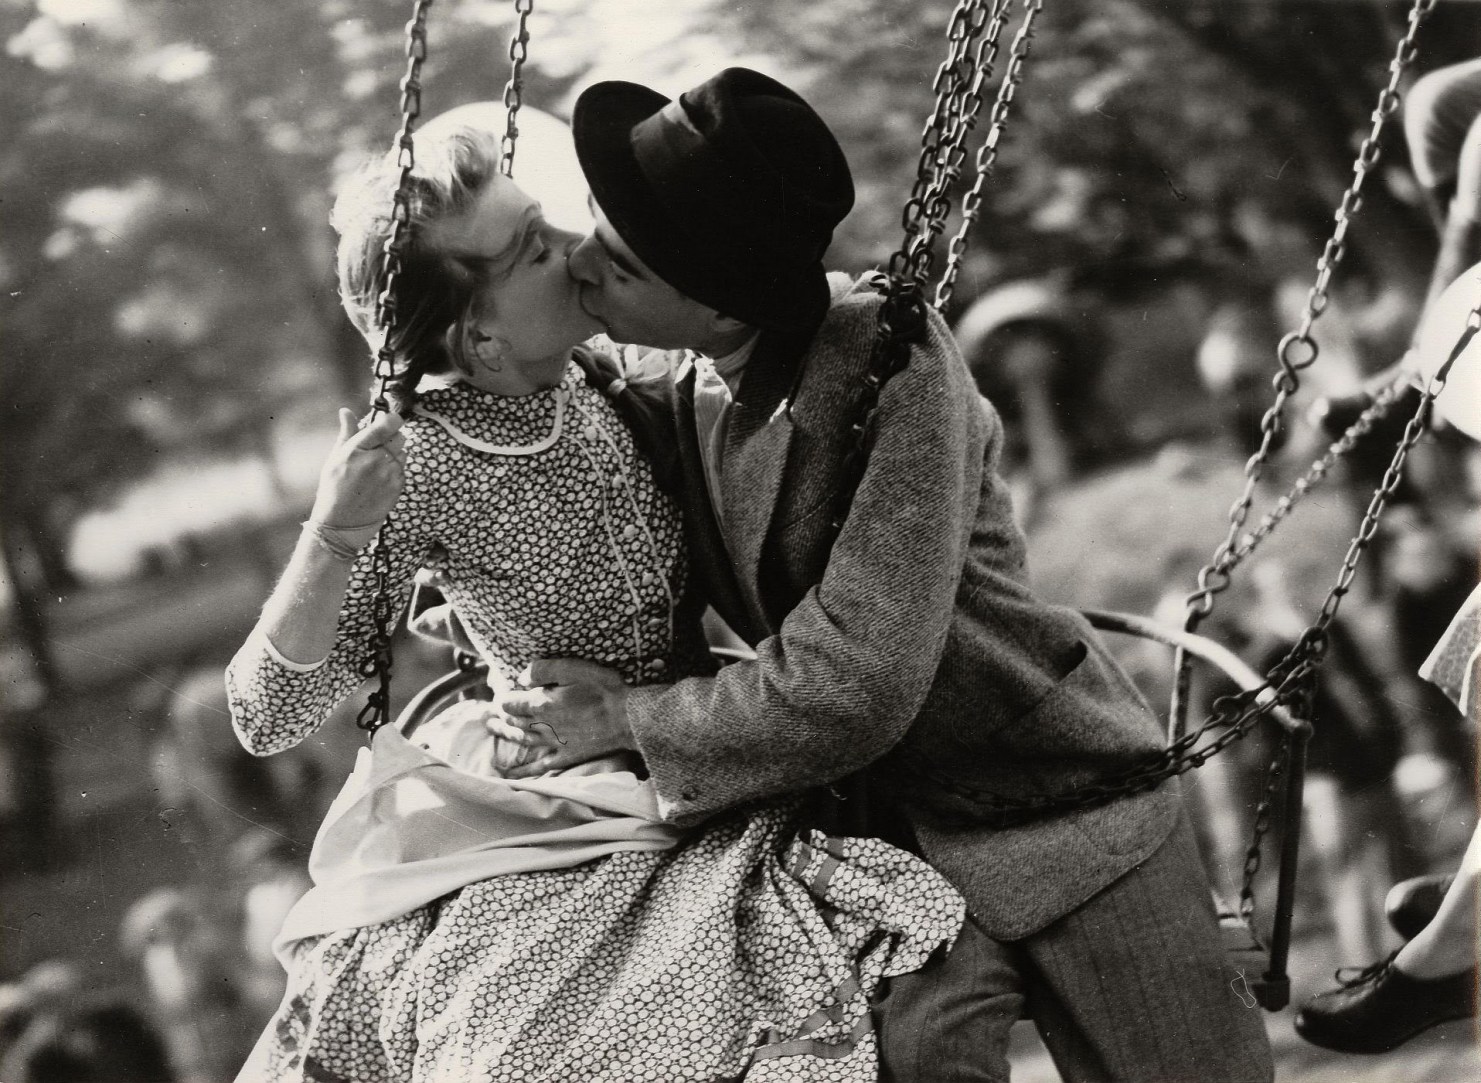 Still from the Film 'Merry-Go-Round' (1956)